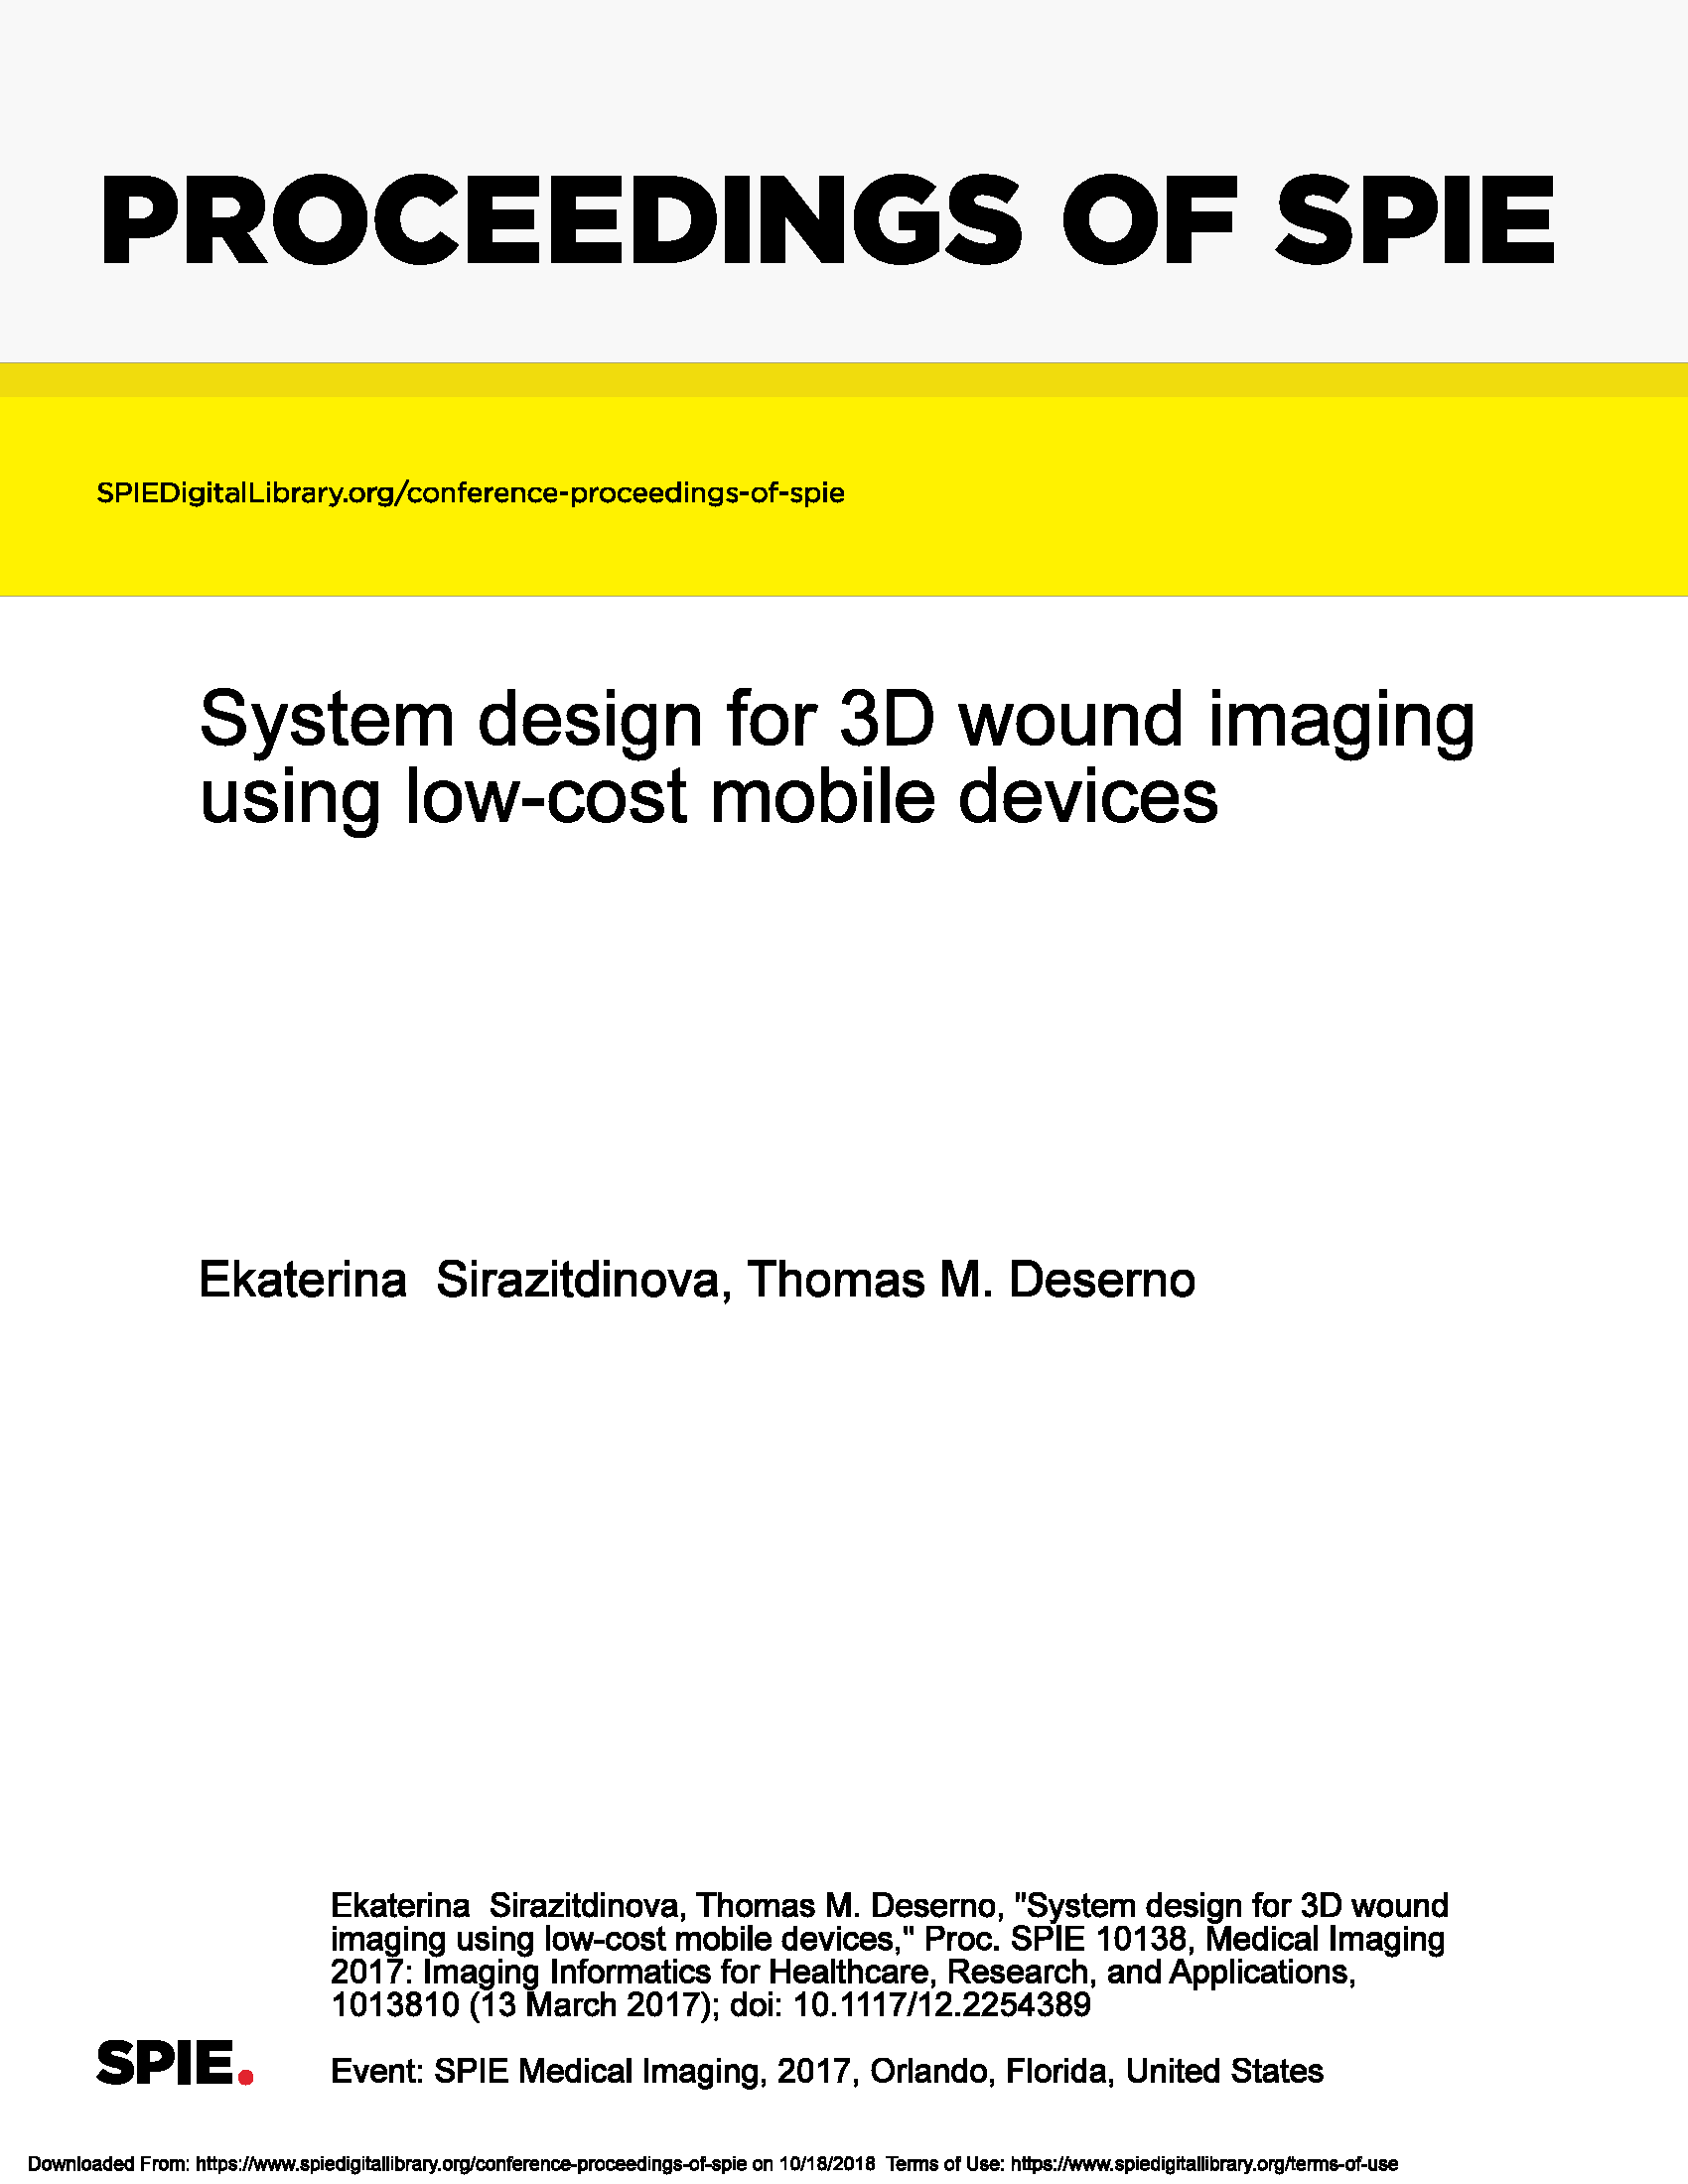 System design for 3D wound imaging using low-cost mobile devices